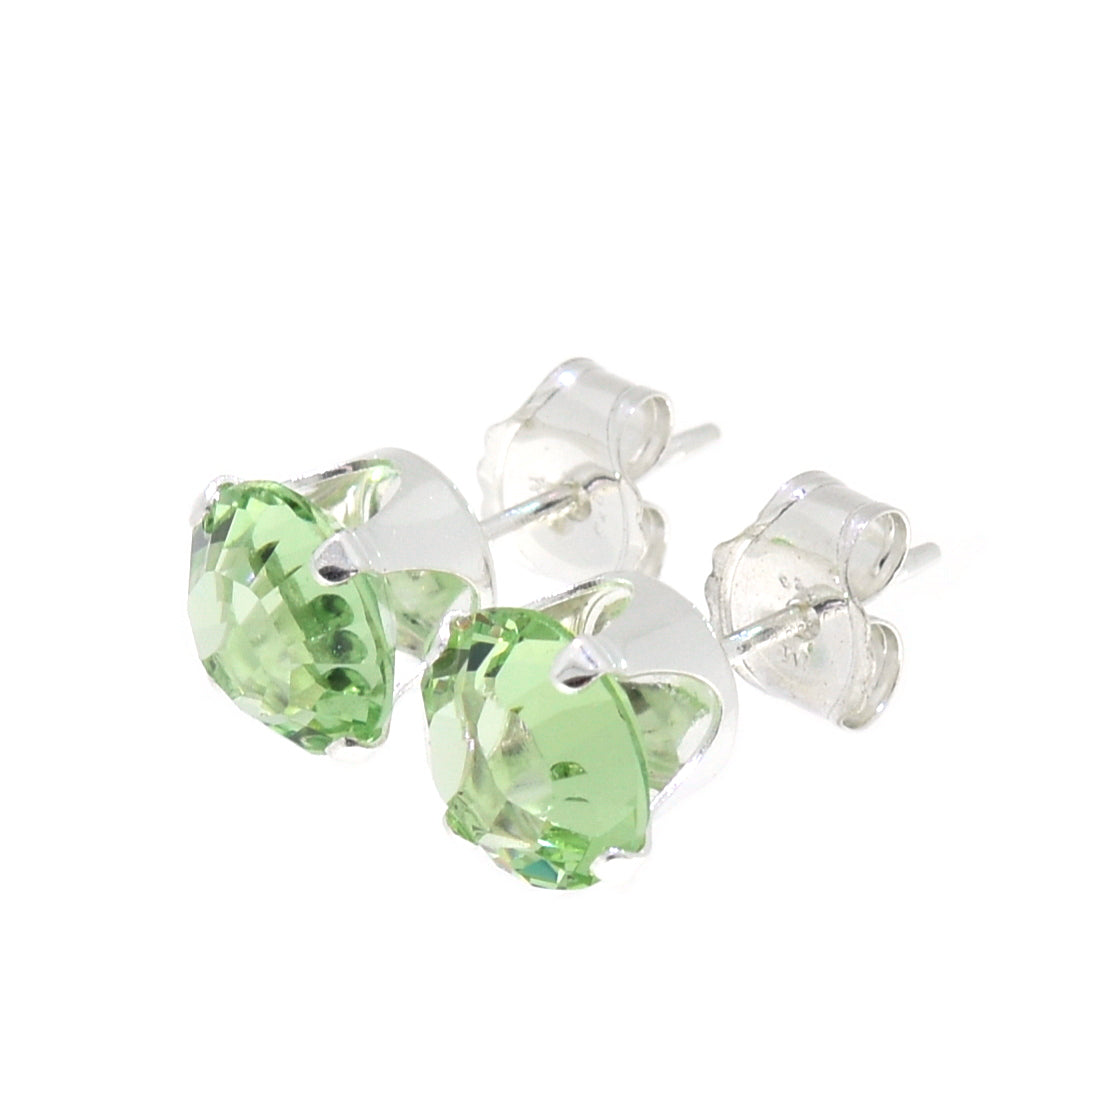 pewterhooter® Women's Classic Collection 925 Sterling silver earrings with sparkling Peridot Green channel crystals, packaged in a gift box for any occasion.